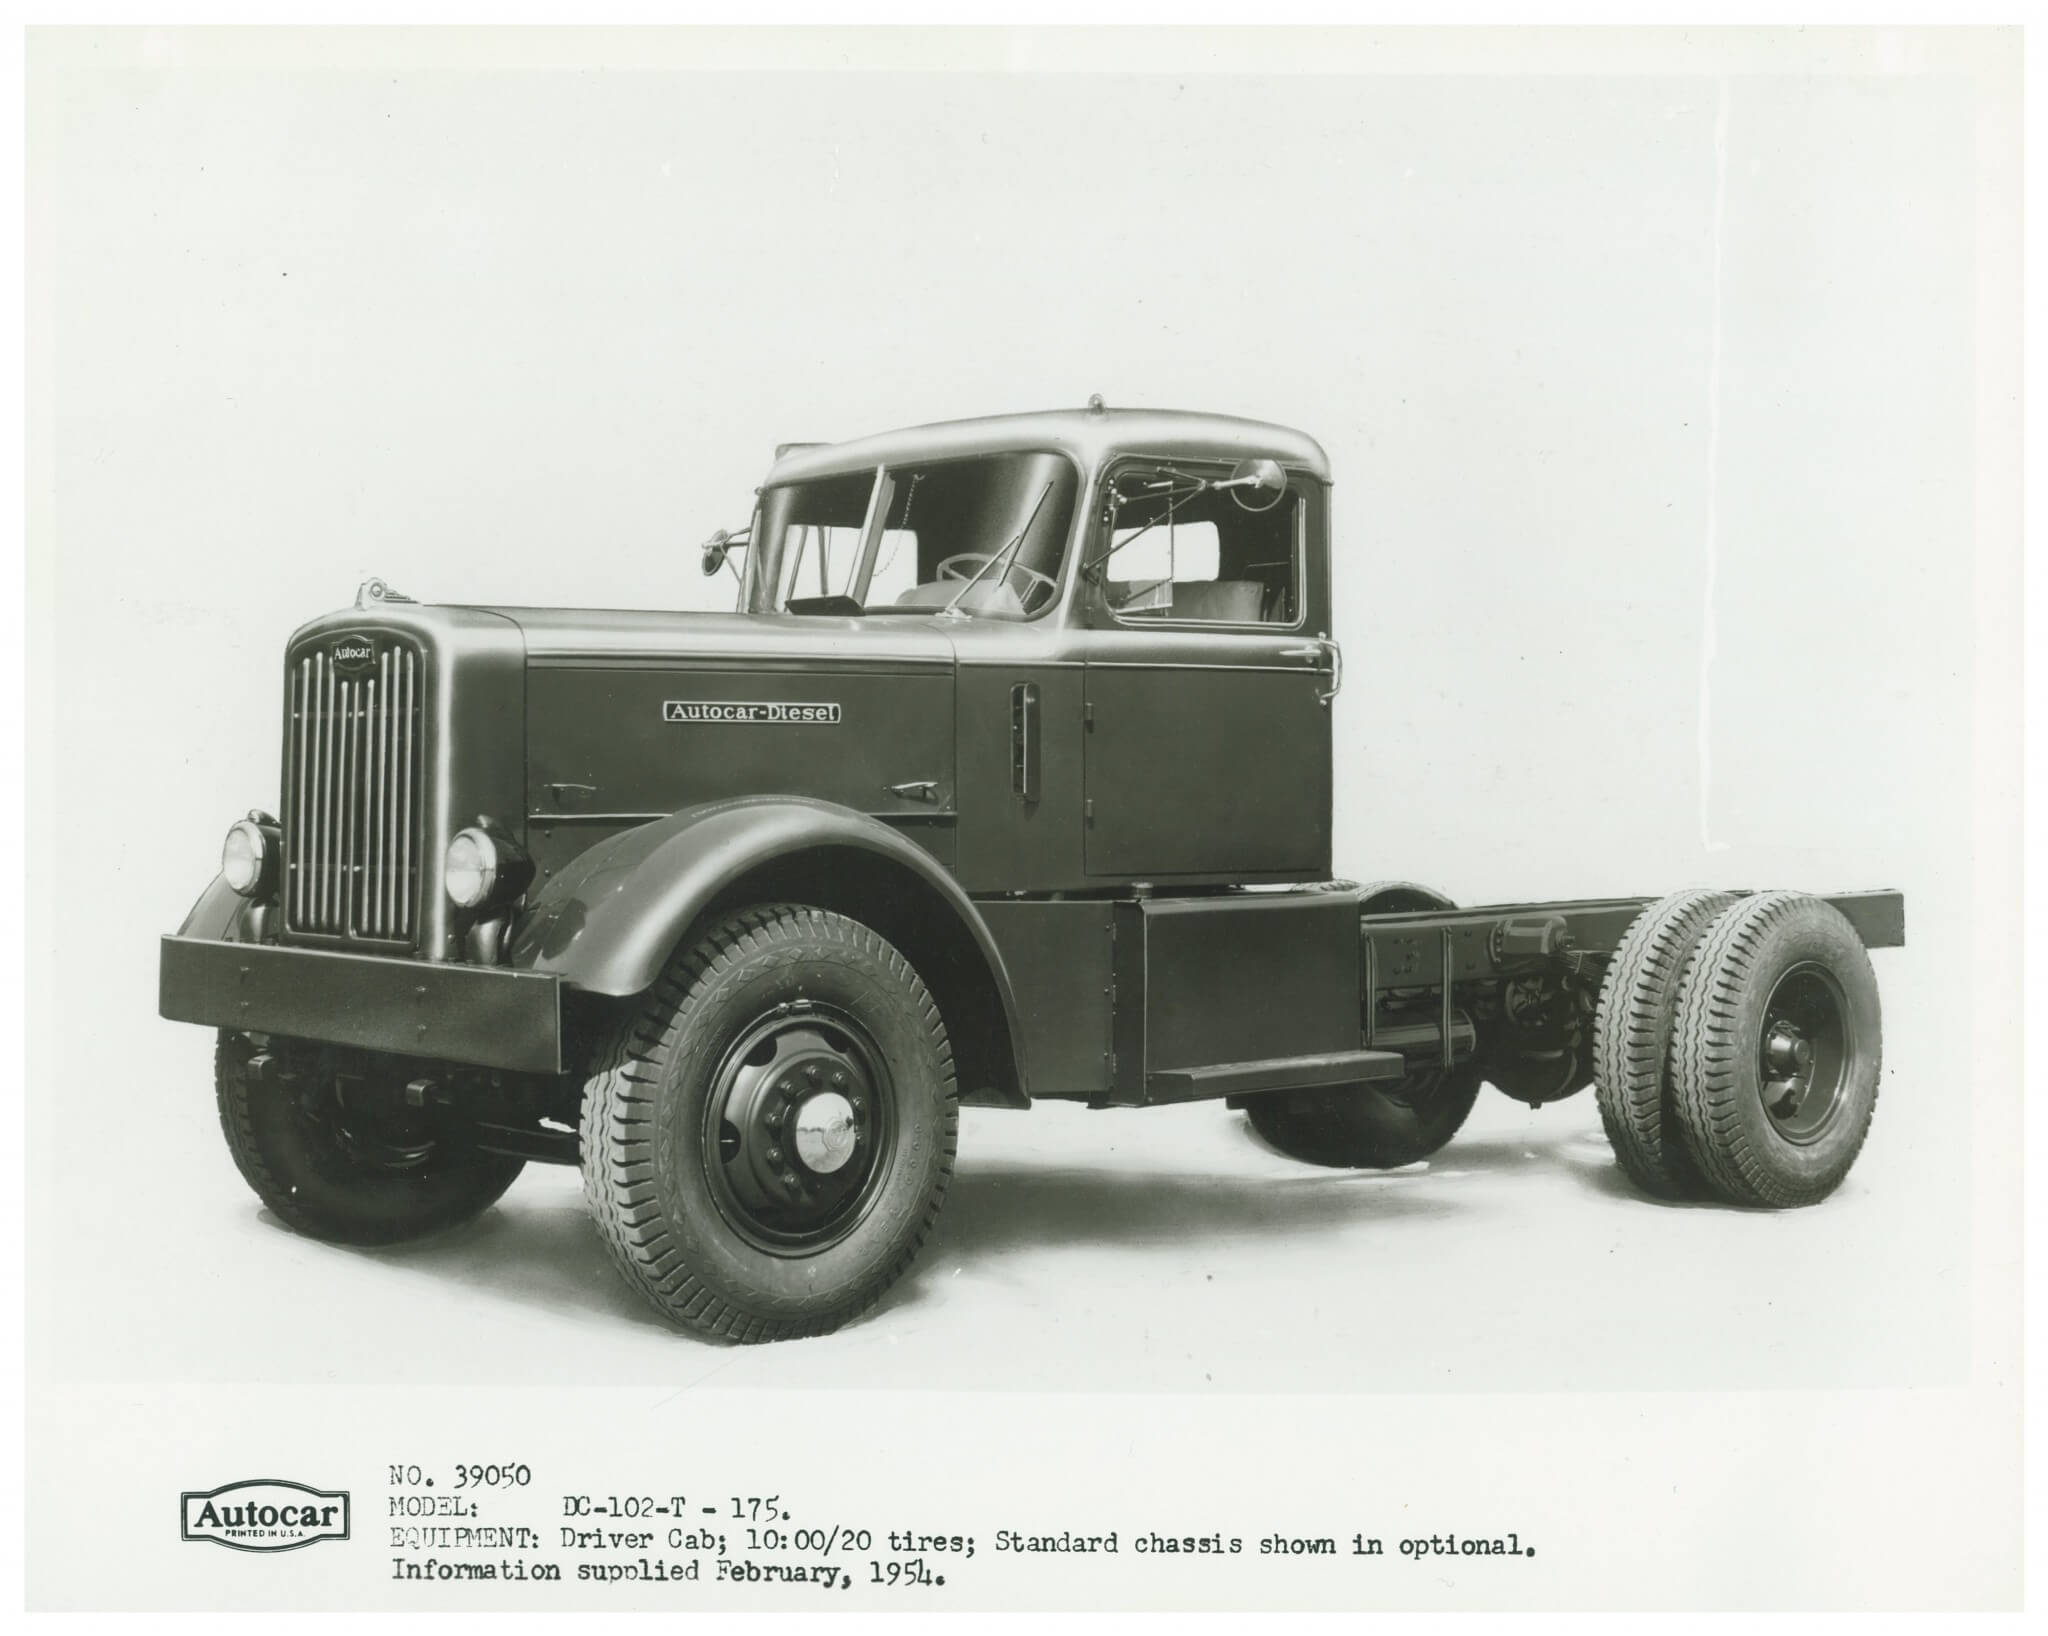 Custom branding was the new thrust of White’s Autocar brand in 1954. This DC Series platform shown is considered the standard chassis.